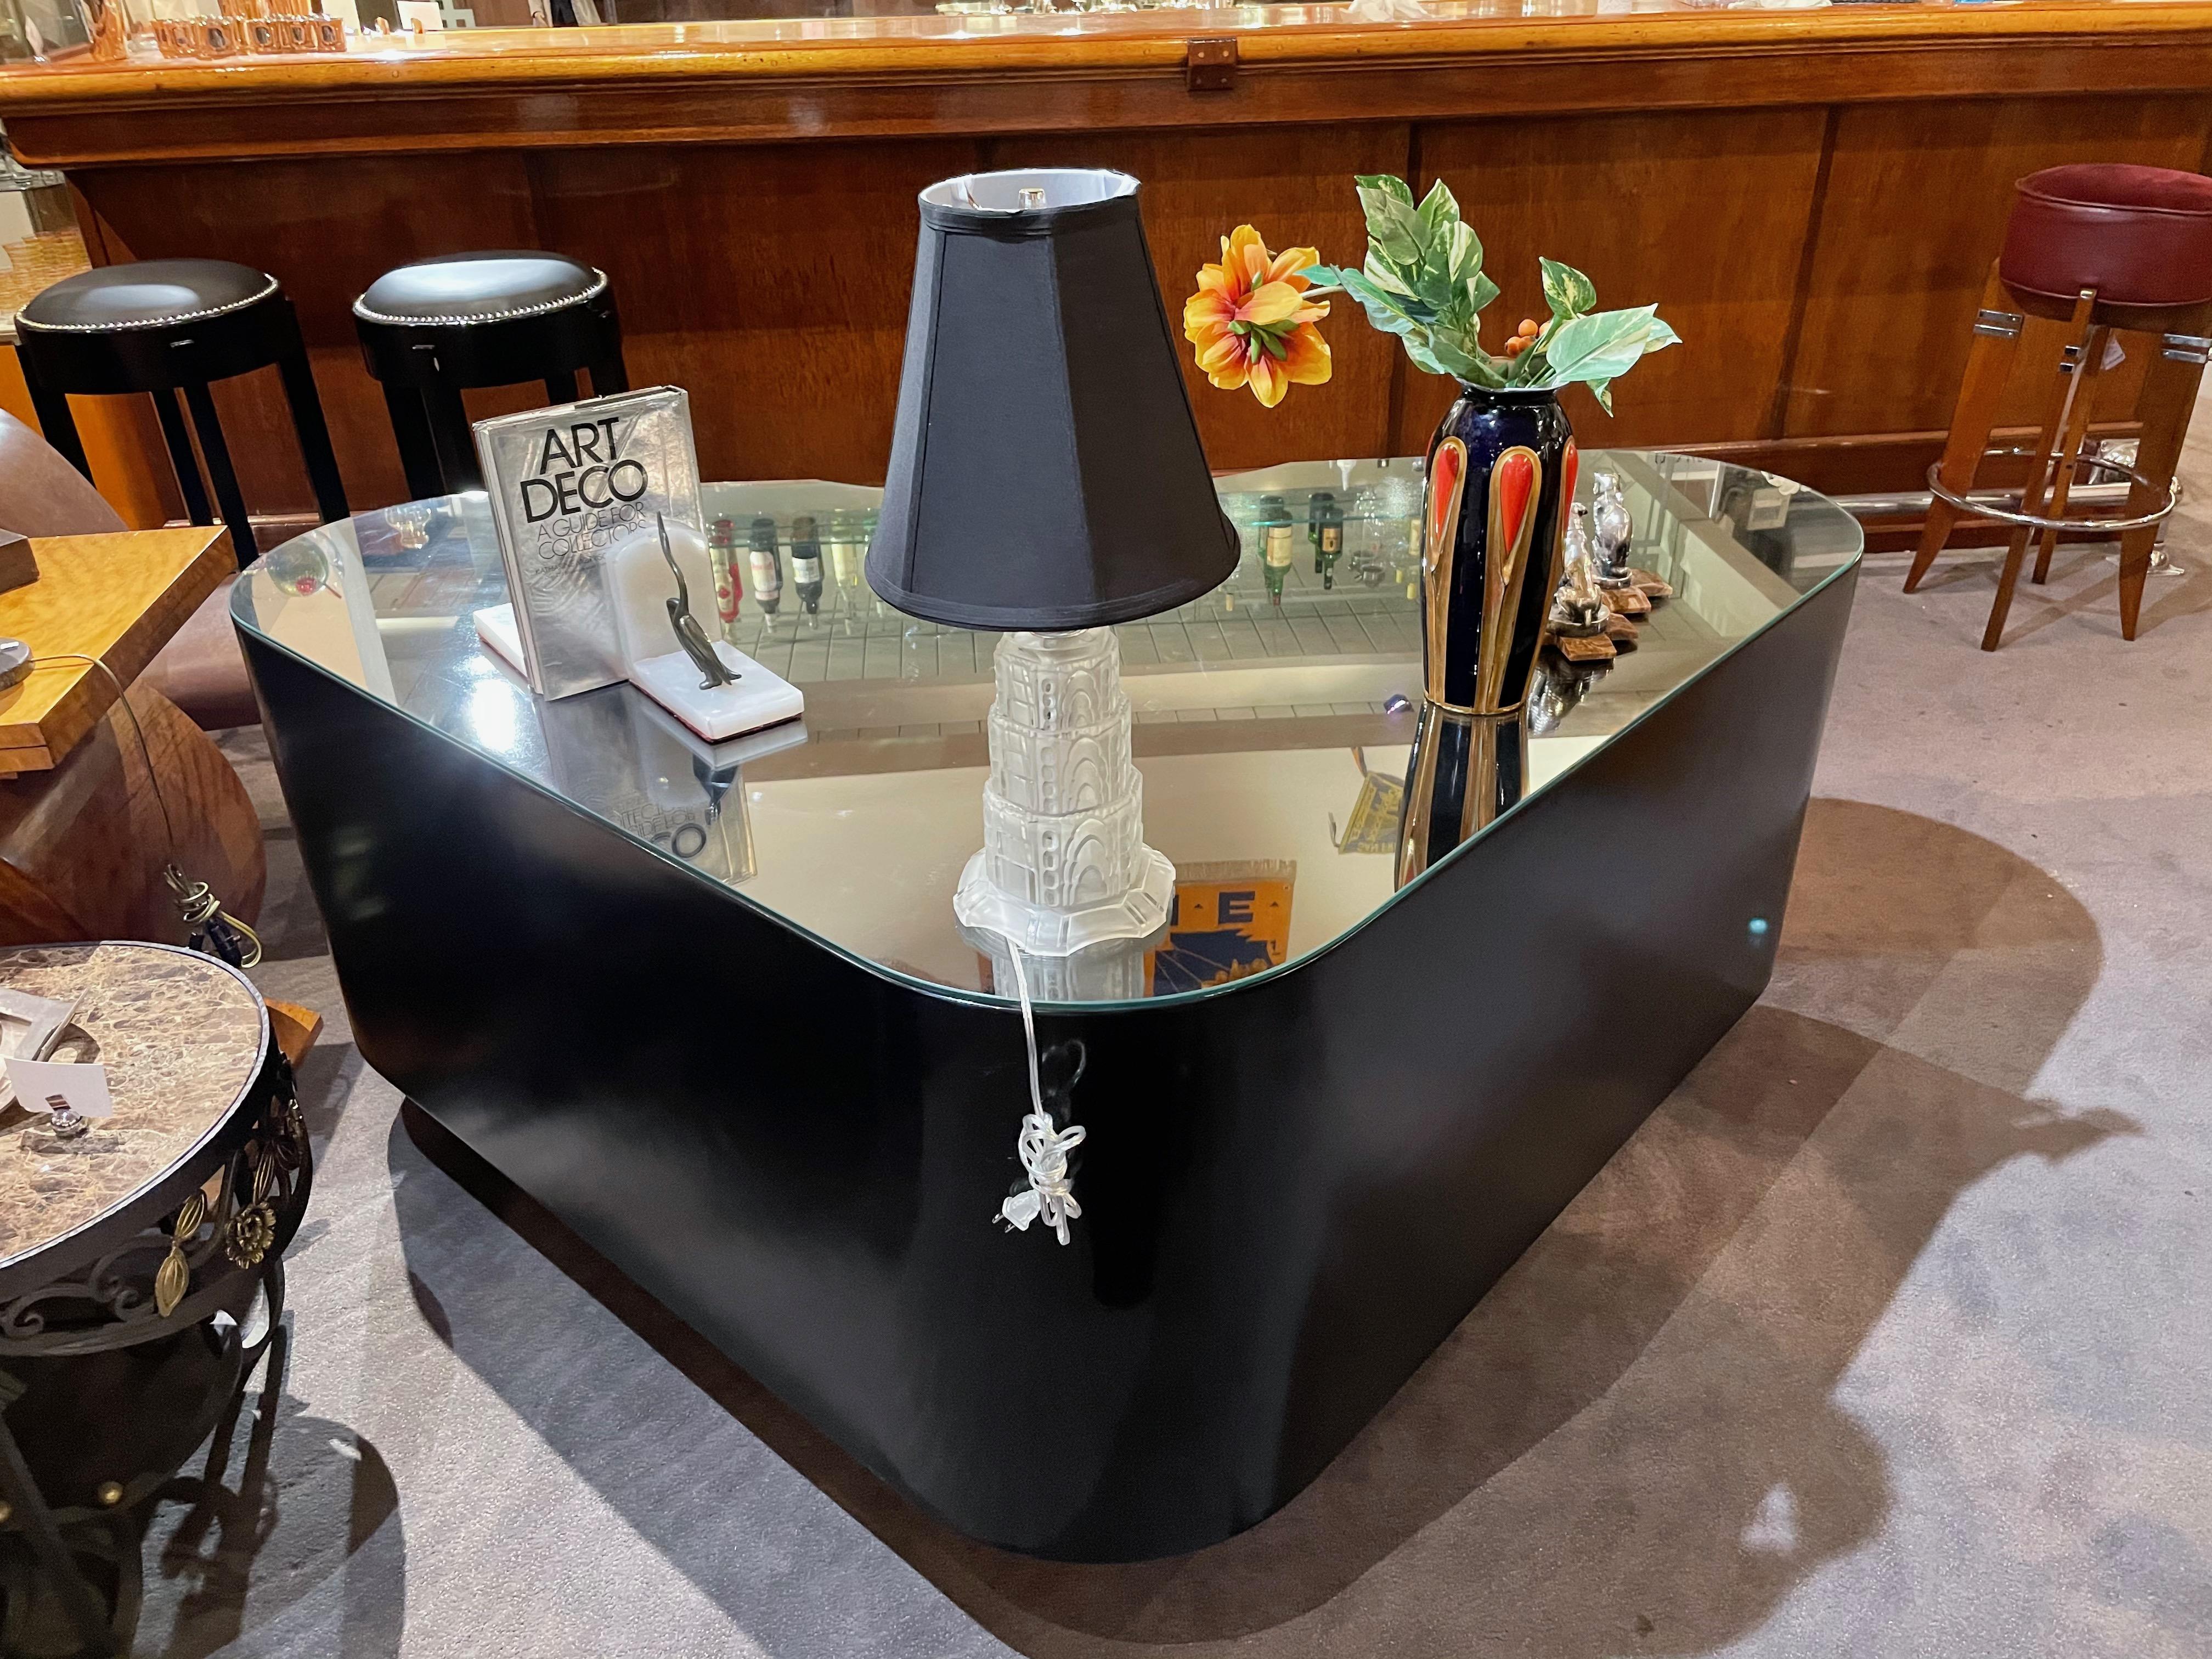 This is a unique and original executive desk, an Art Deco icon. One really needs to see it in person to appreciate the subtle design and overall style of this great American-made desk. “Fletcher Aviation” and “Giving Wings to the World! It’s very